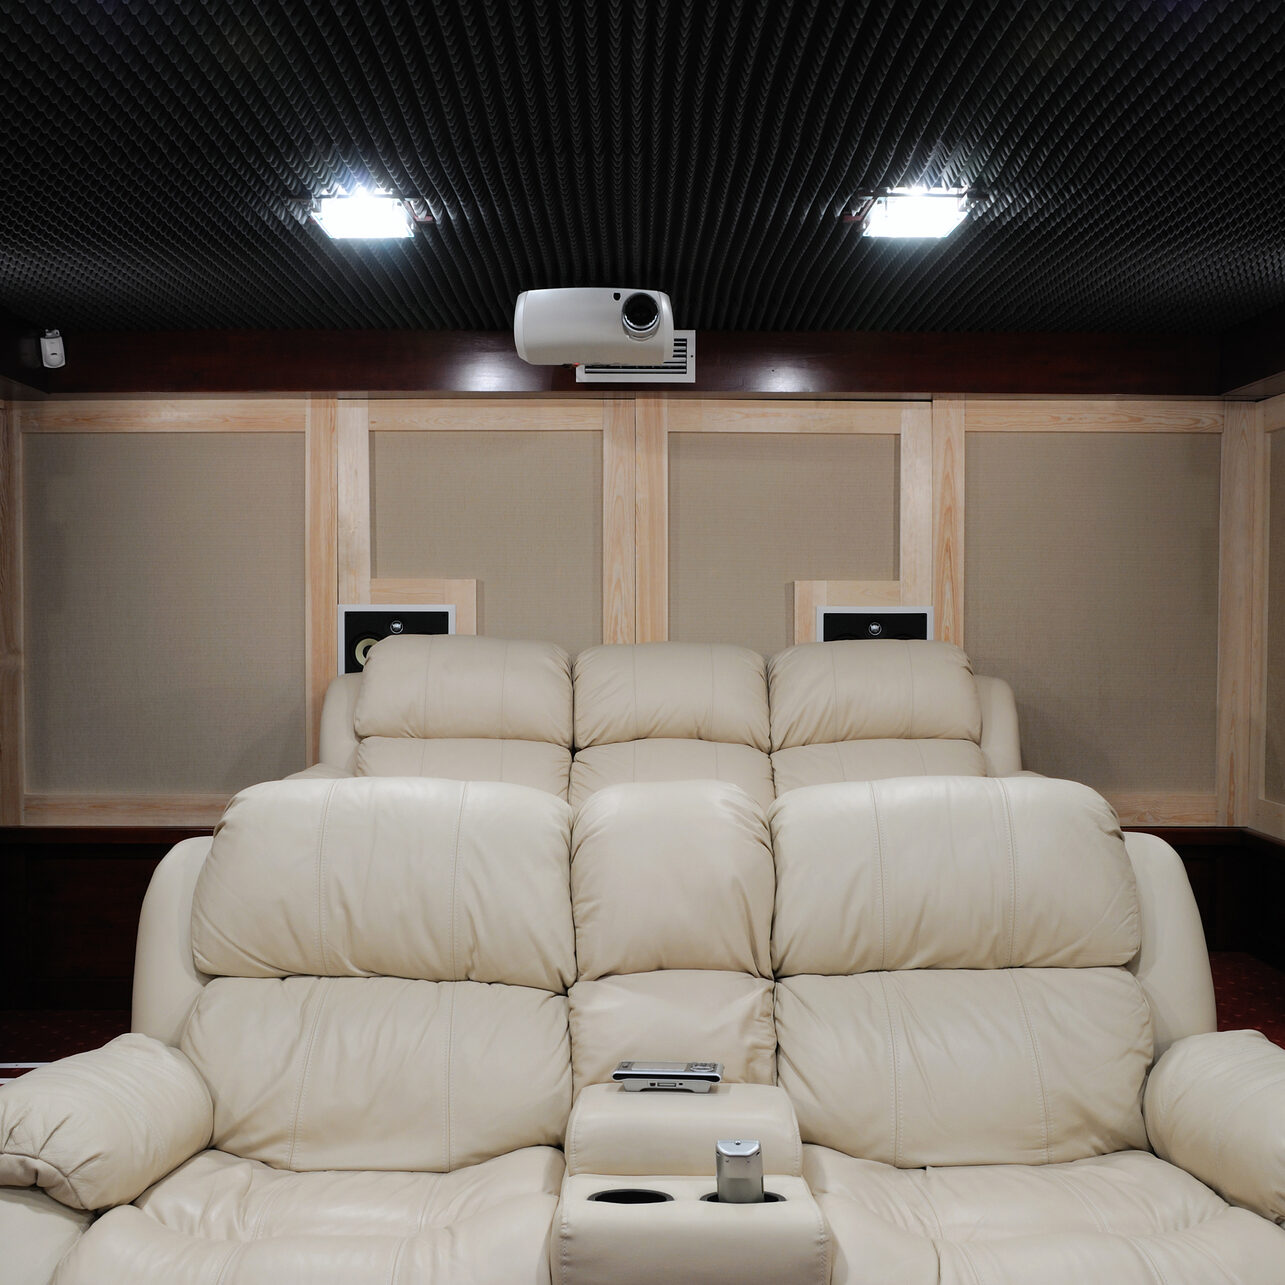 Acoustic panels installed in home theatre.